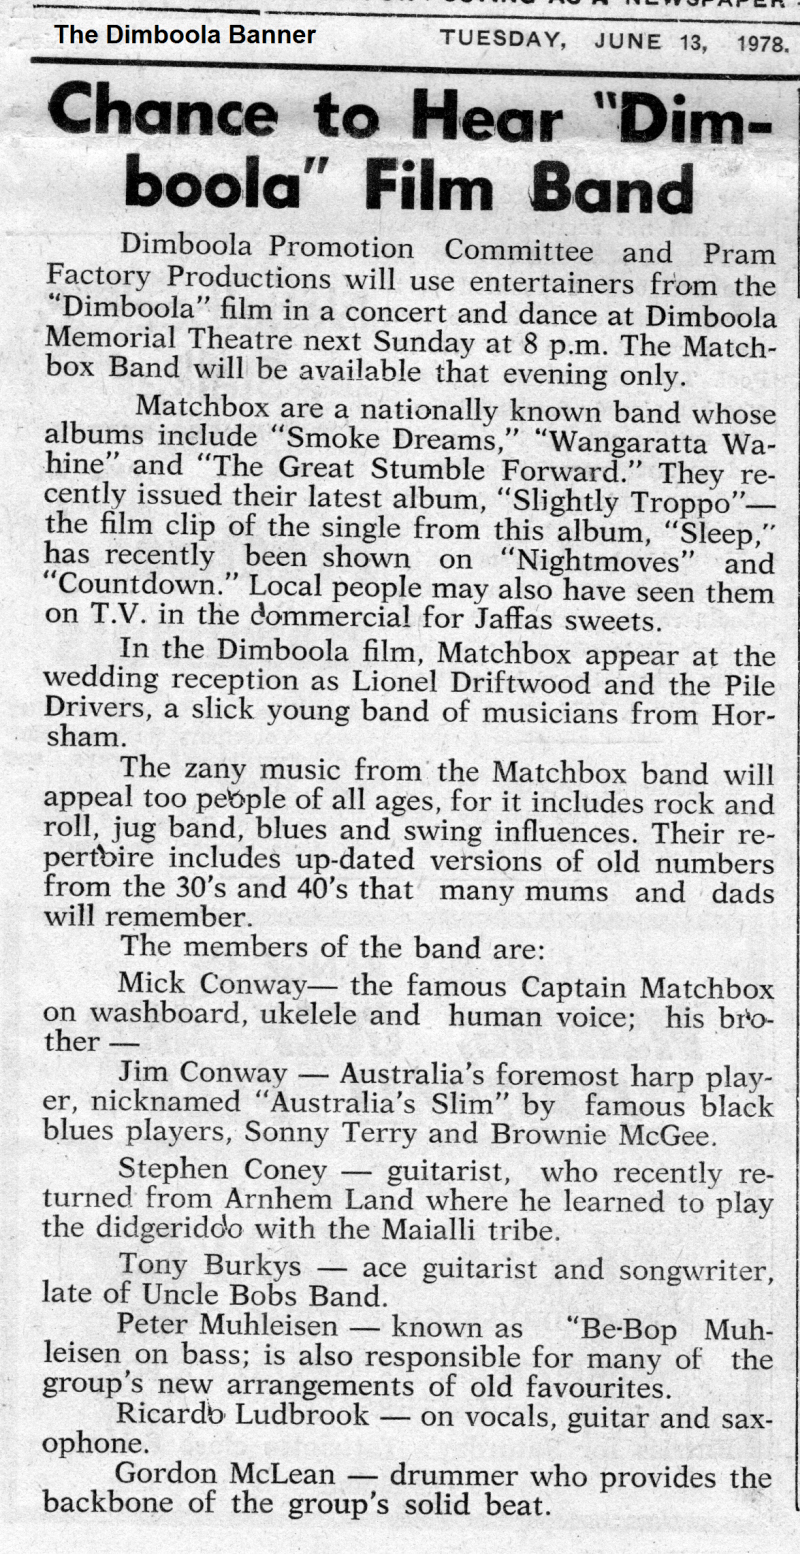 Film band article